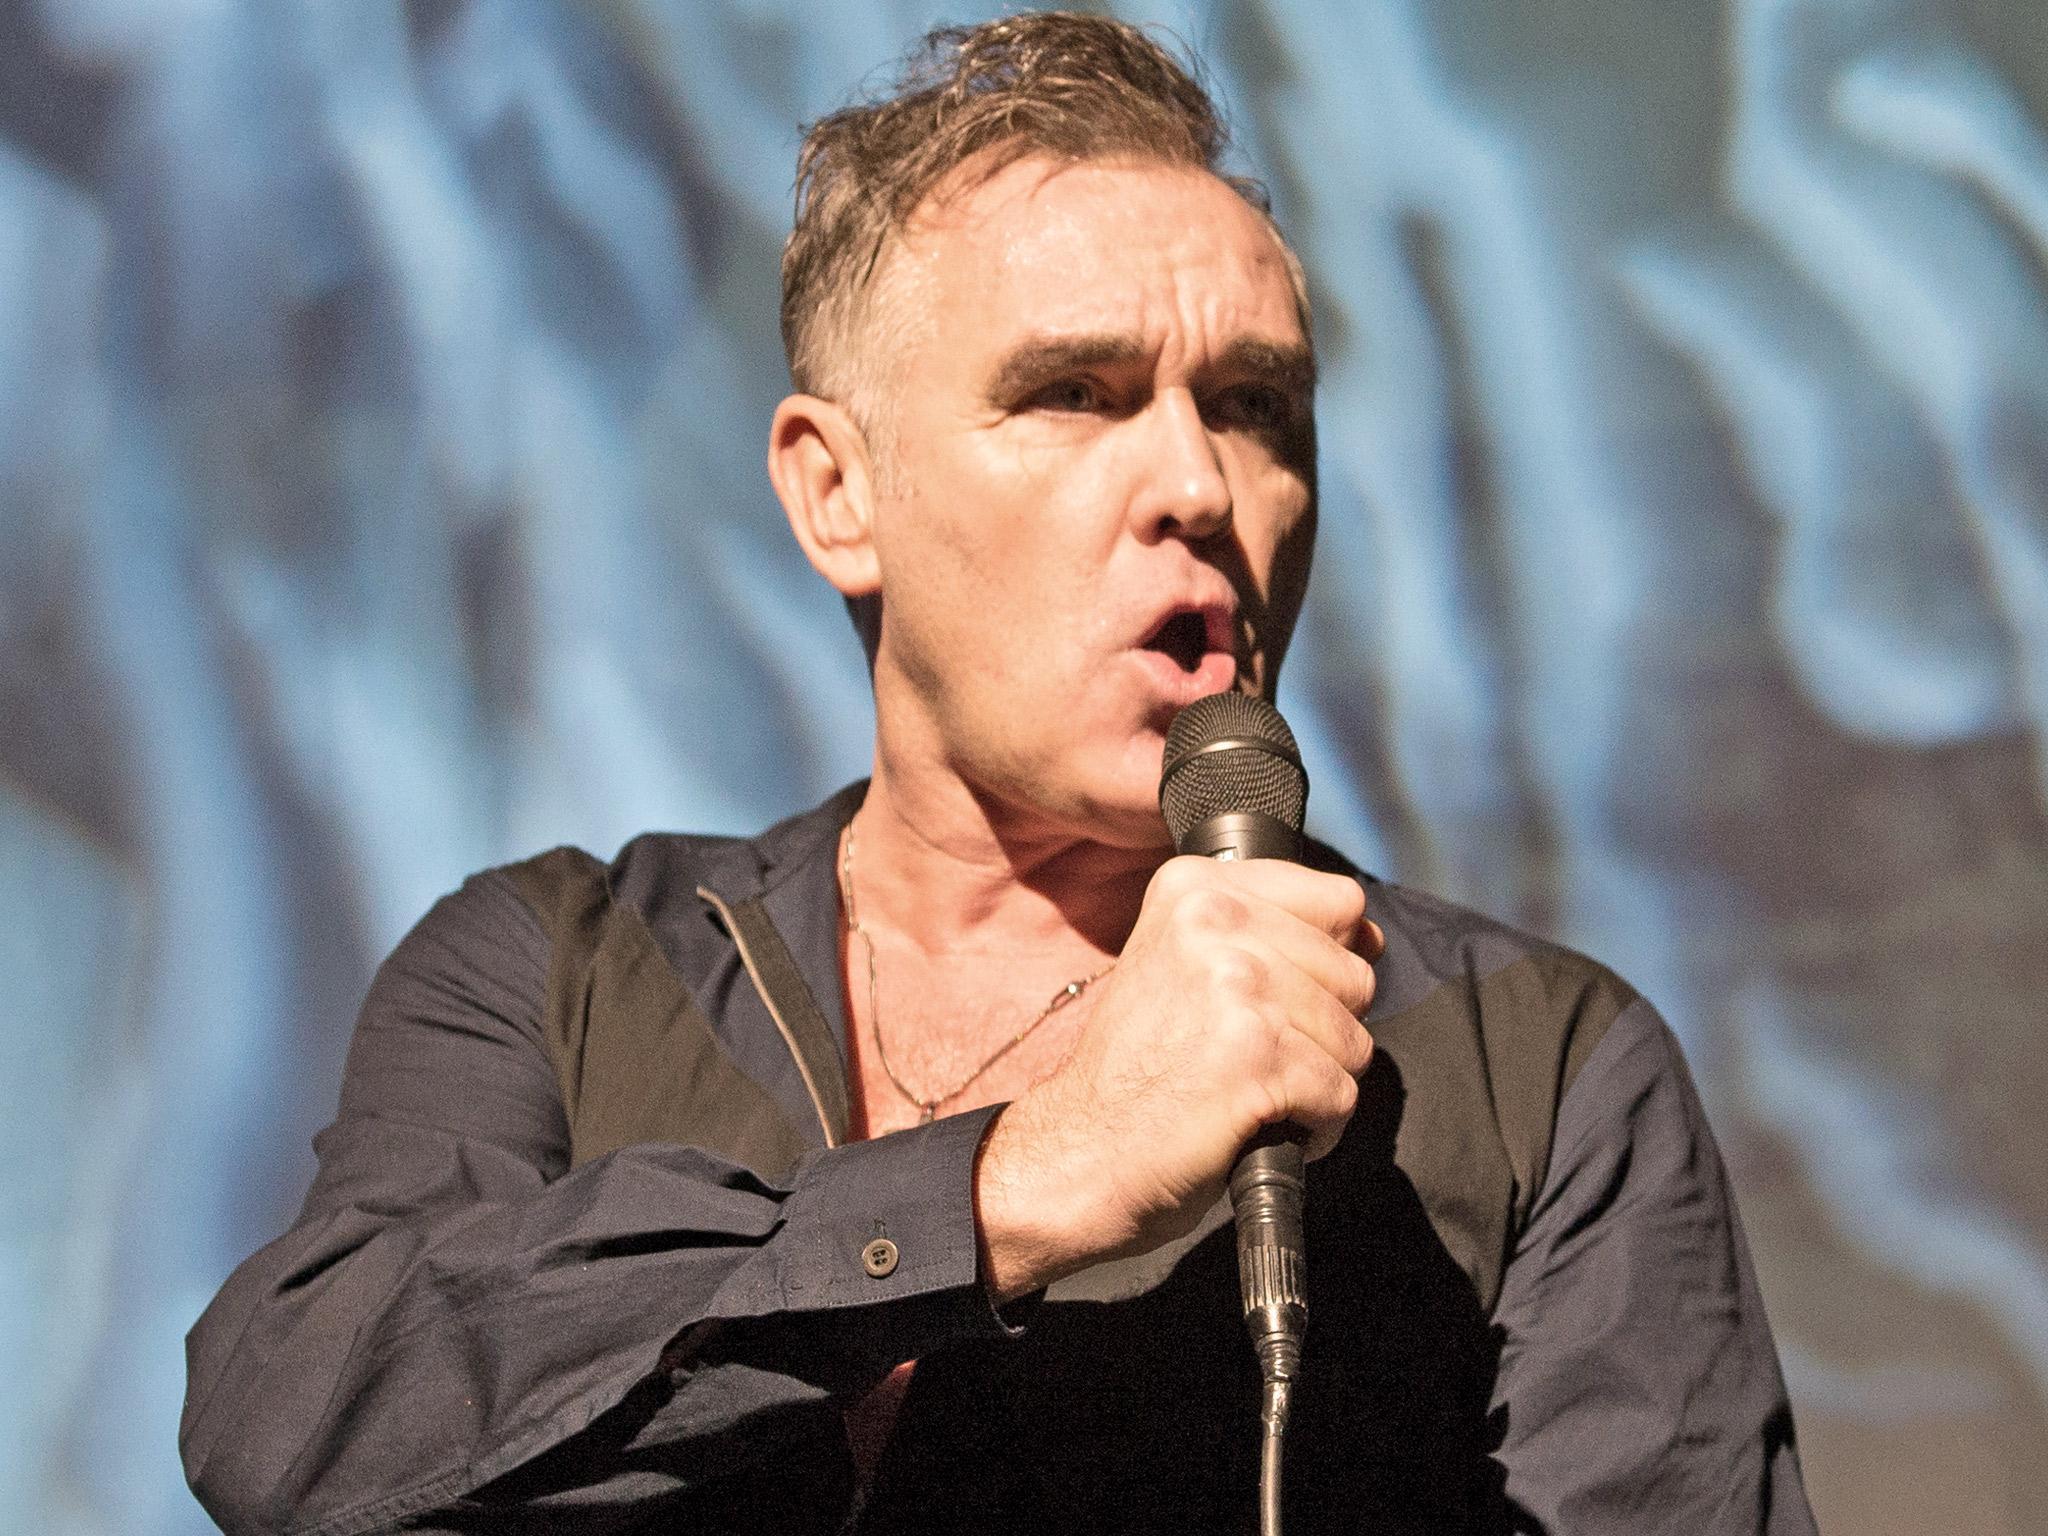 Morrissey has had to postpone another US tour date due to double pneumonia